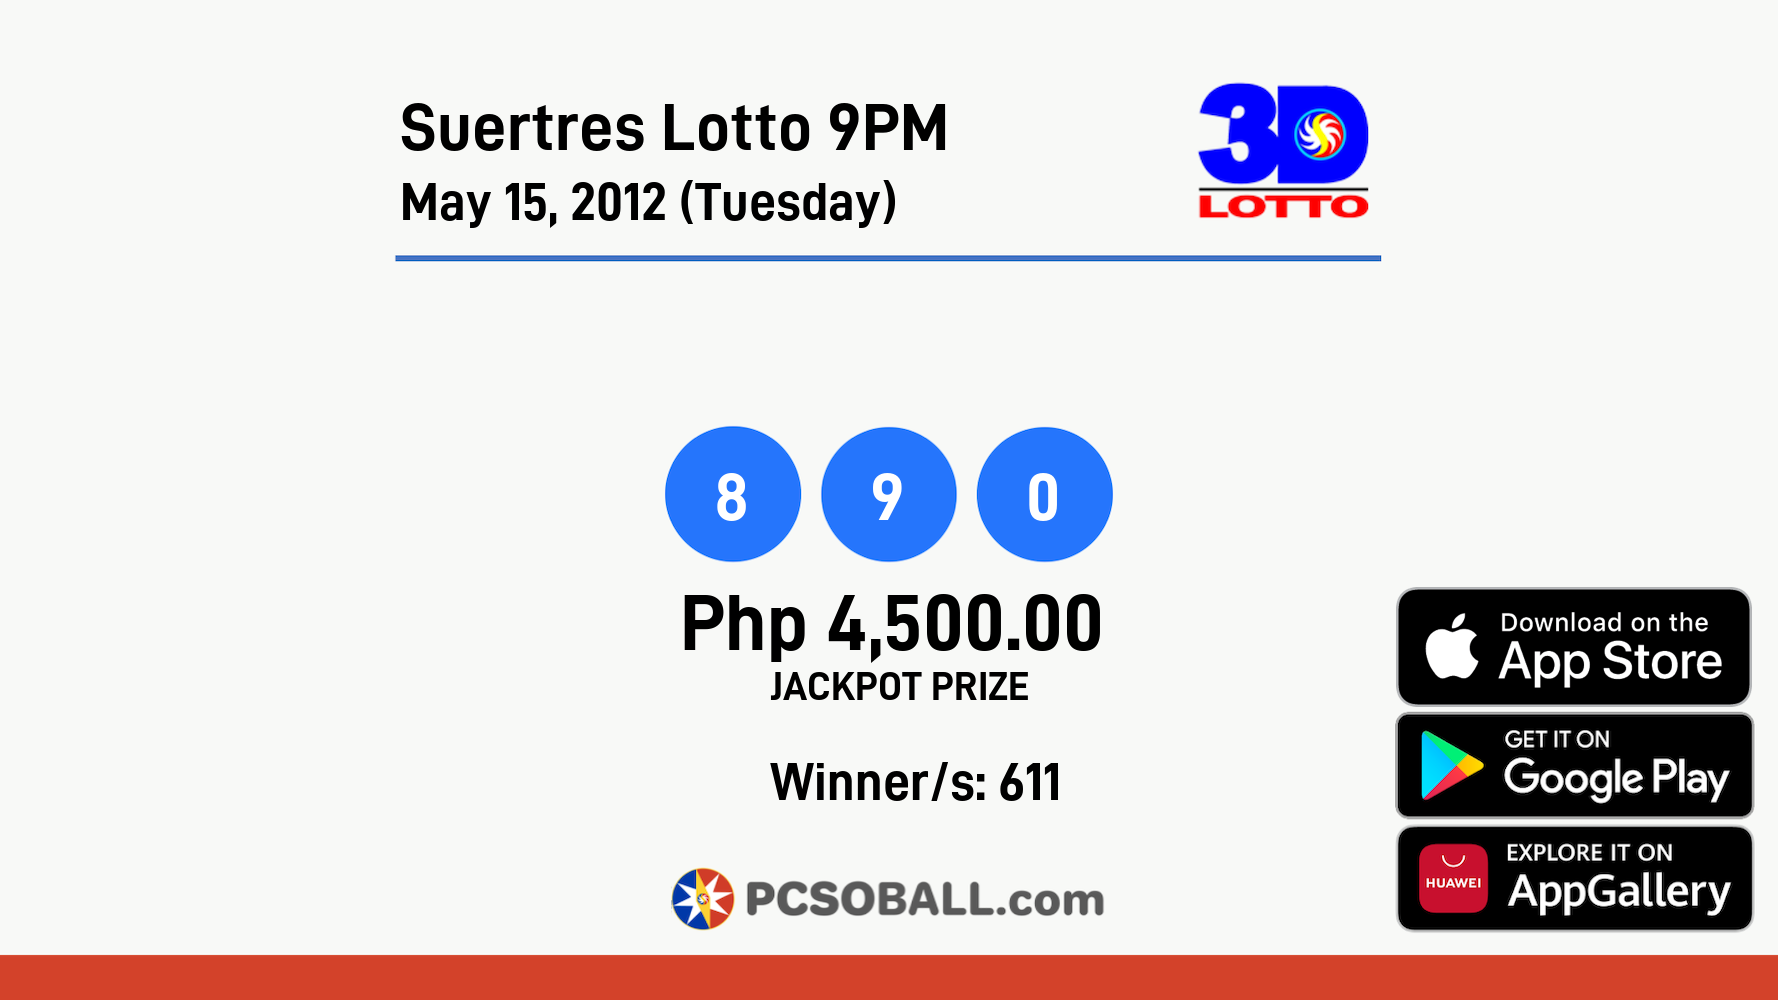 Suertres Lotto 9PM May 15, 2012 (Tuesday) Result